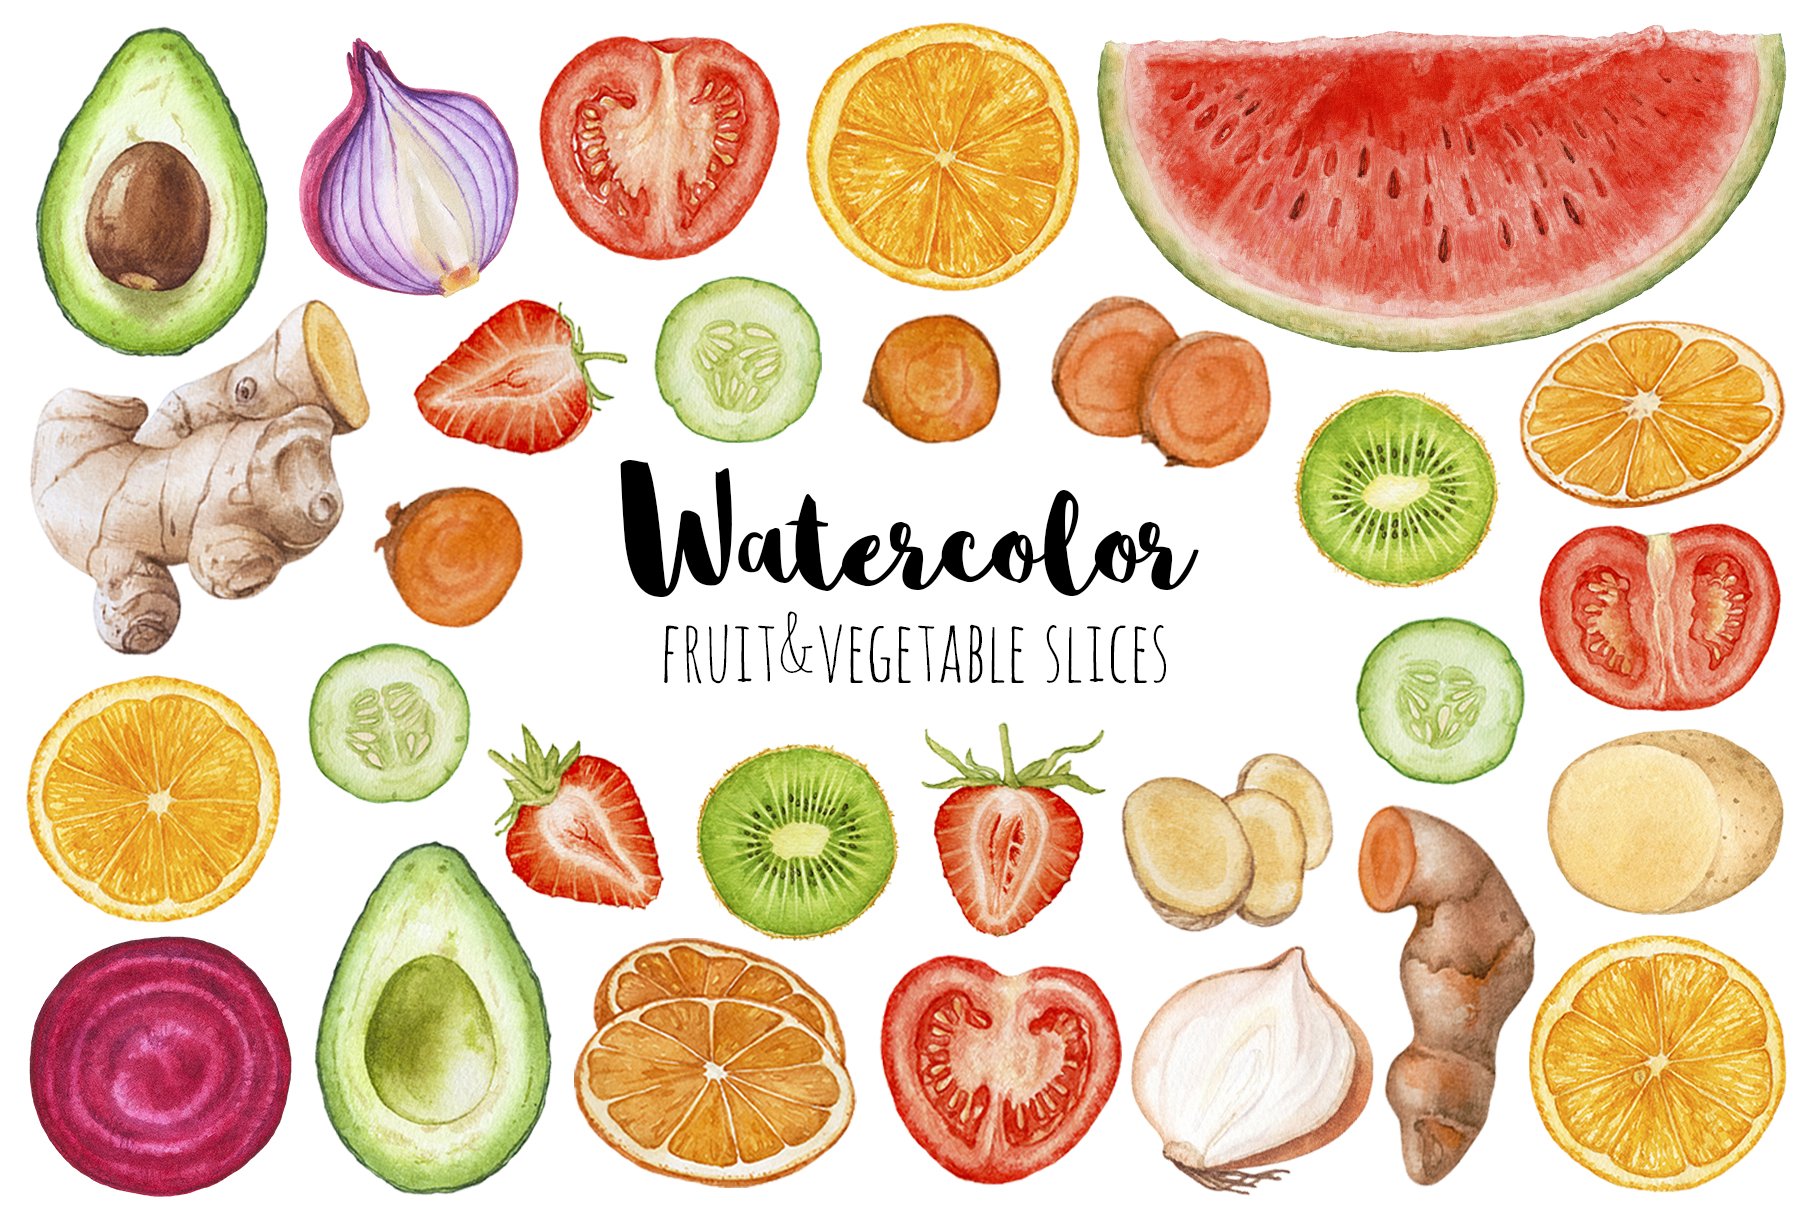 Watercolor fruit&vegetable slices cover image.